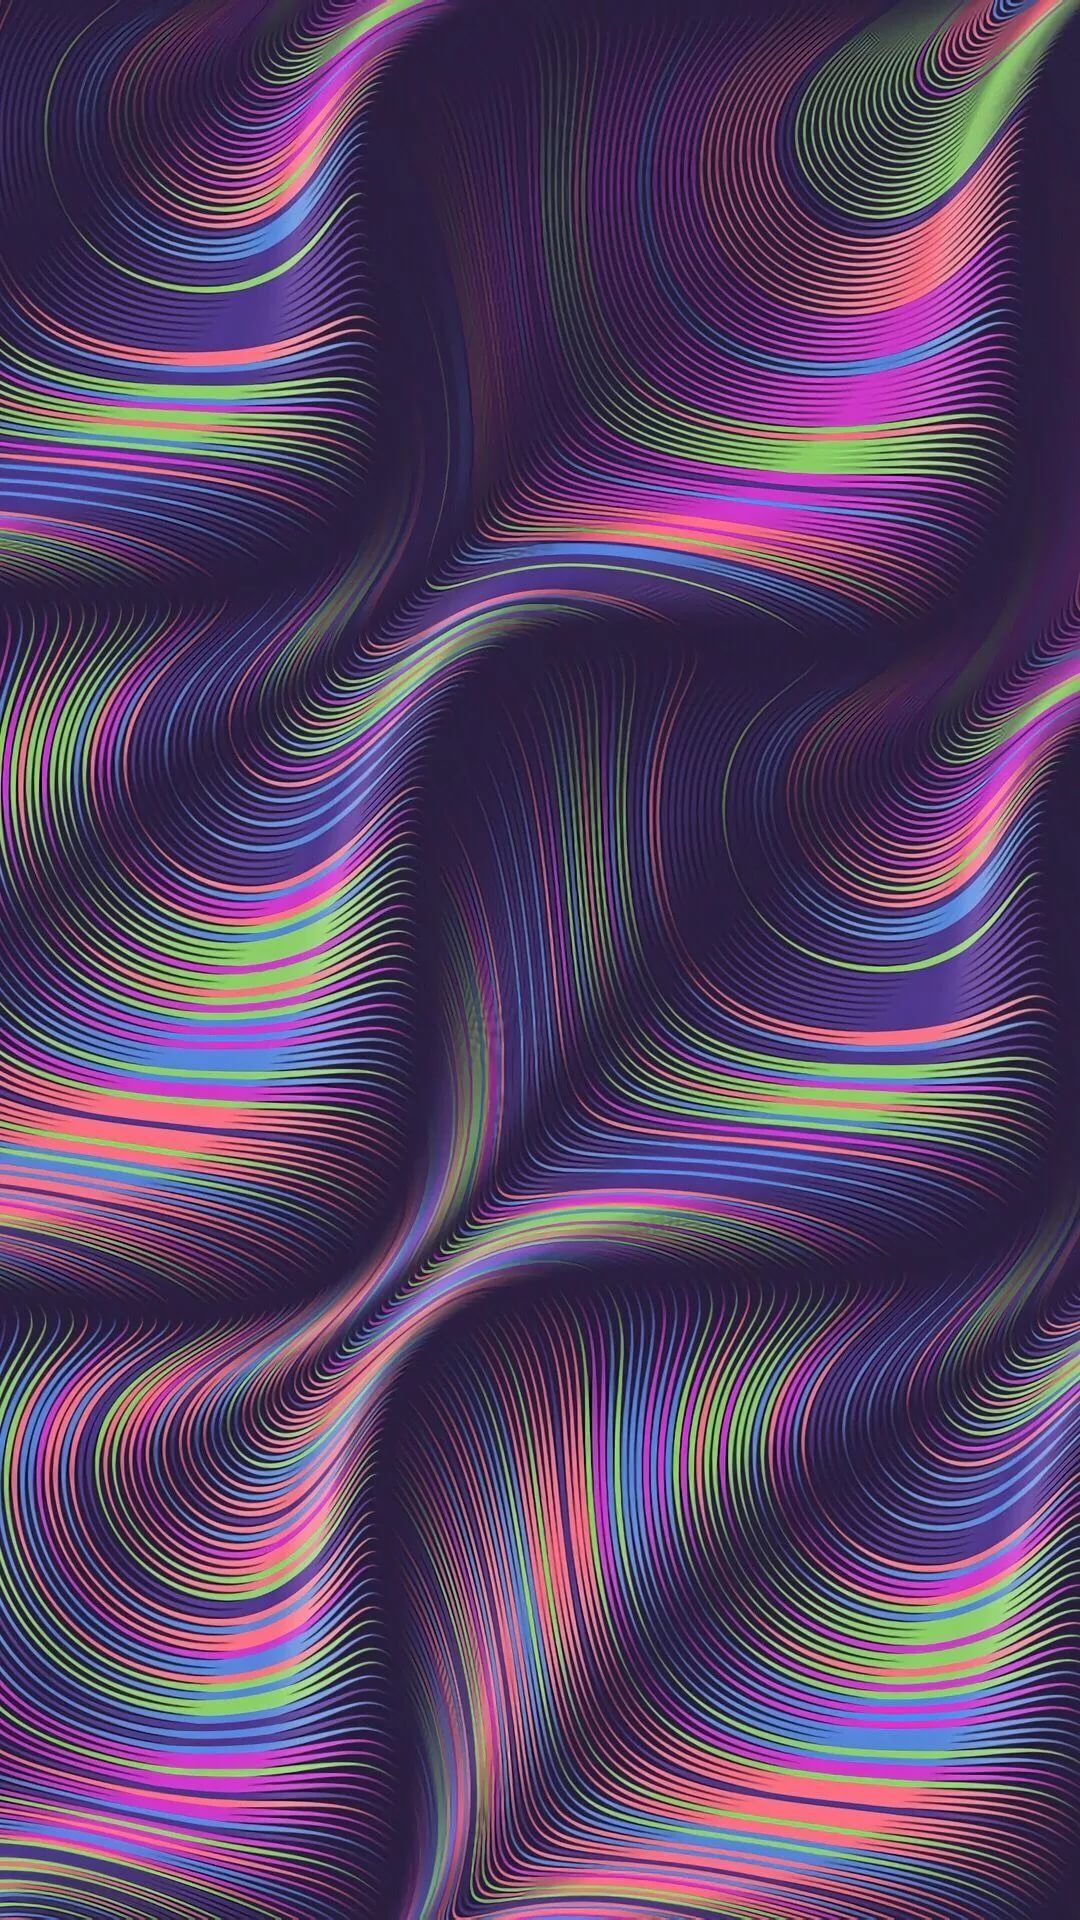 Trippy wallpaper for android